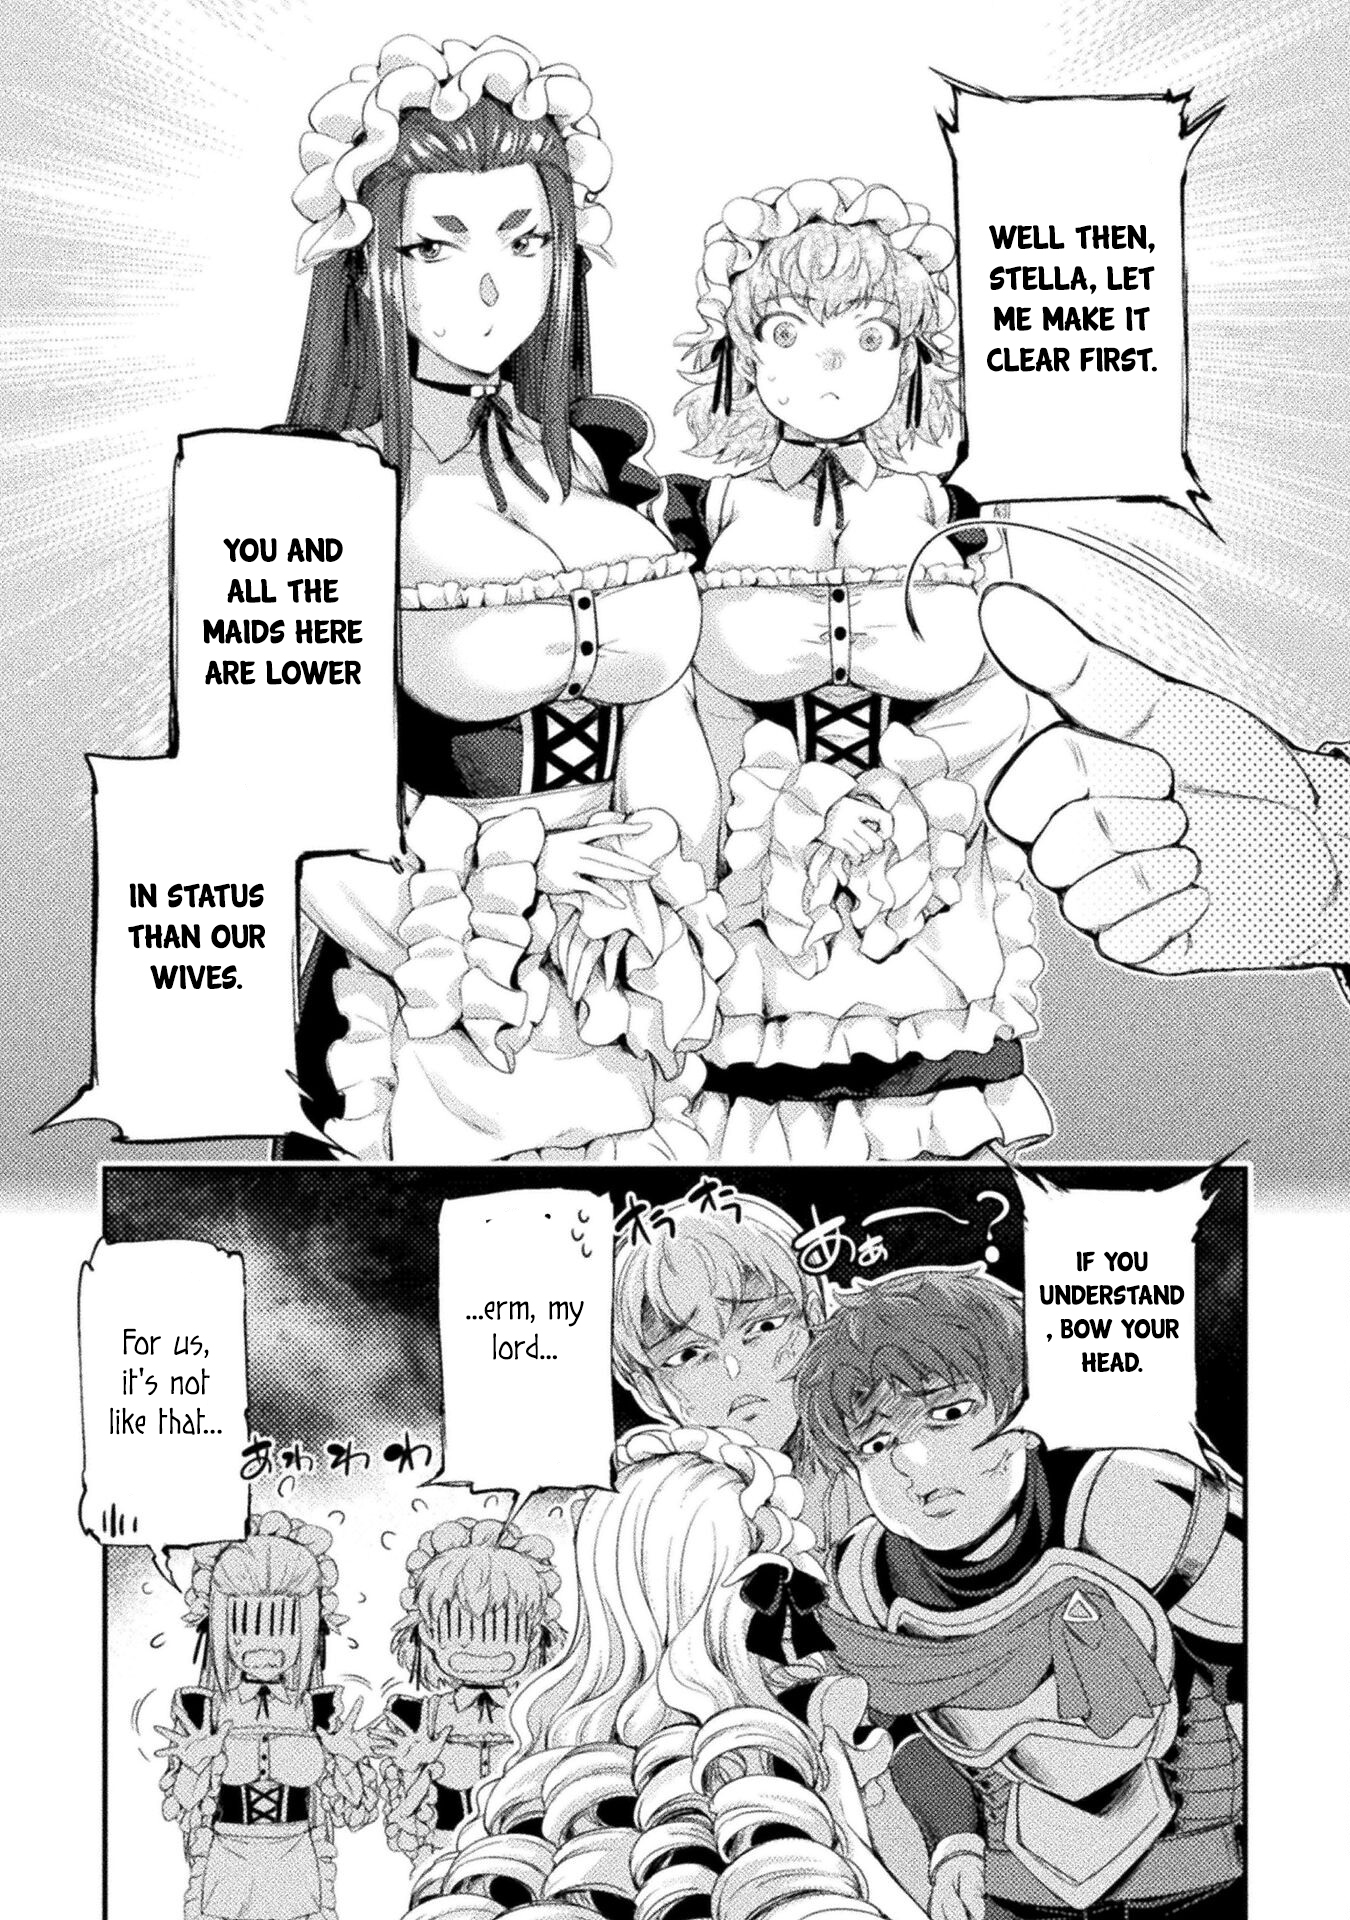 Astro King - Summoned as a Hero, I Turned Out to Be Low Rank, so I Made a Maid Harem! - chapter 18 - #5